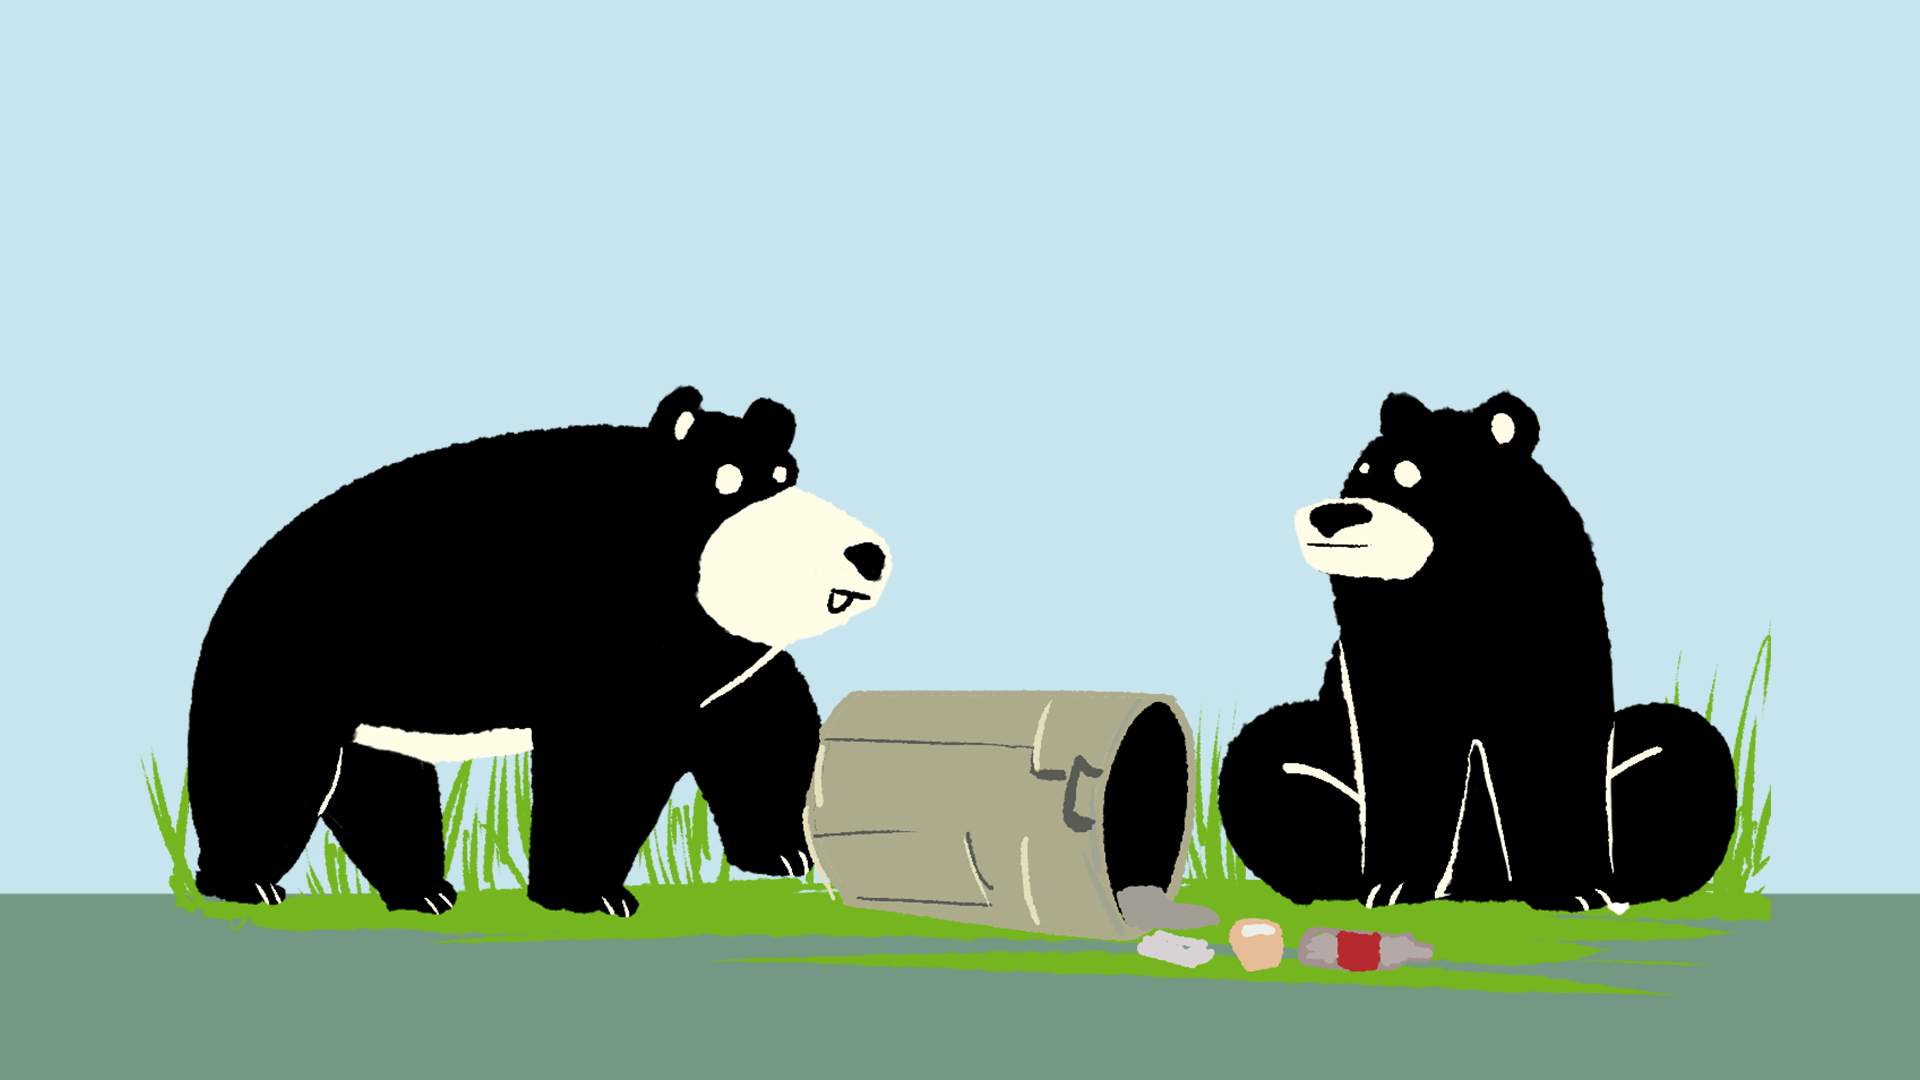 An illustration of a gathering of bears sitting on the grass